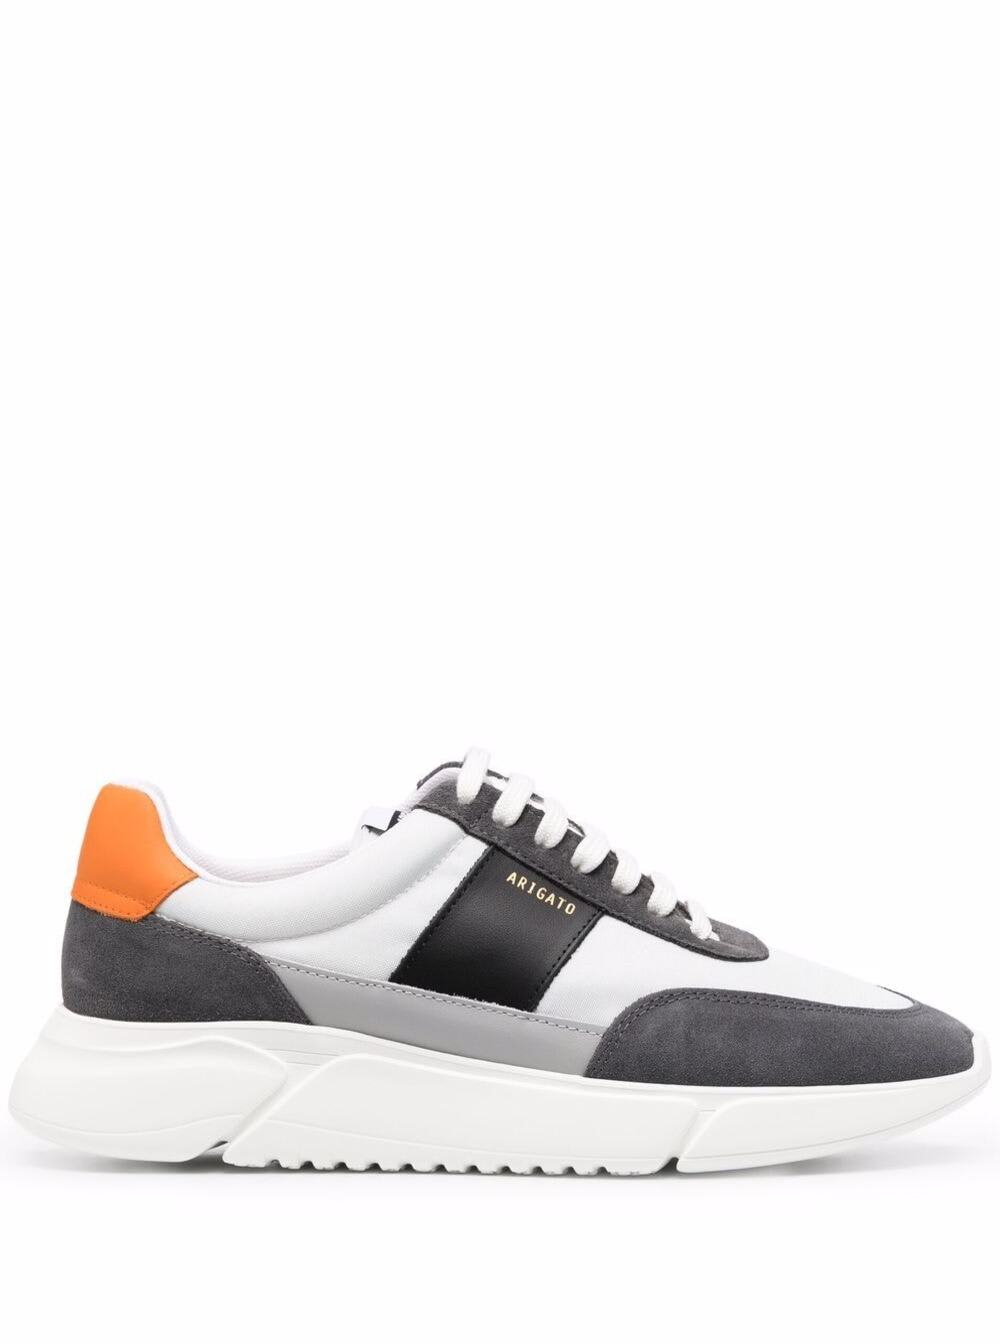 Axel Arigato Genesis Vintage Runner Recycled Fabric Leather And Suede Sneakers